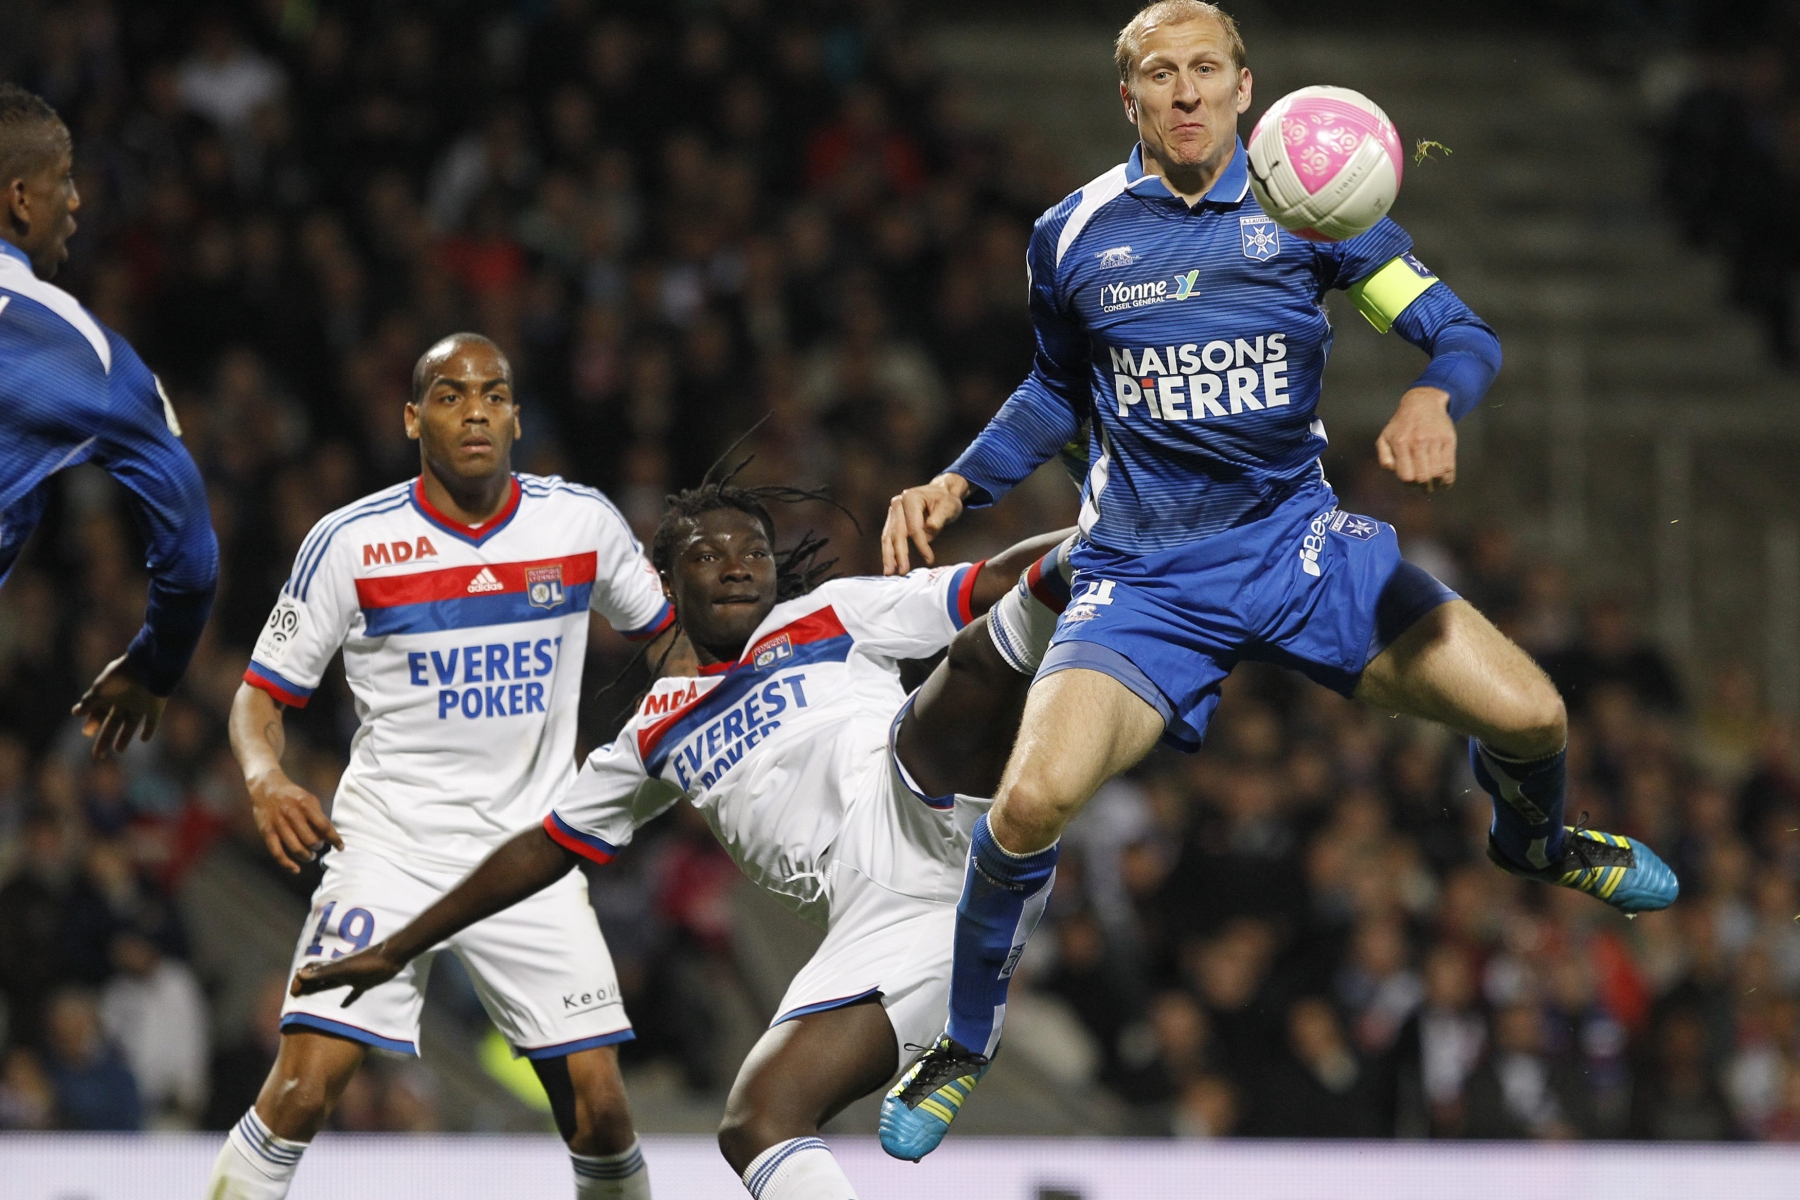 Lyon's Bafe Gomis, center, challenges for the ball with Auxerre's Stephane Grichting, right, during their French League One soccer match at Gerland stadium, in Lyon, central France, Saturday, April 7, 2012. (AP Photo/Laurent Cipriani)